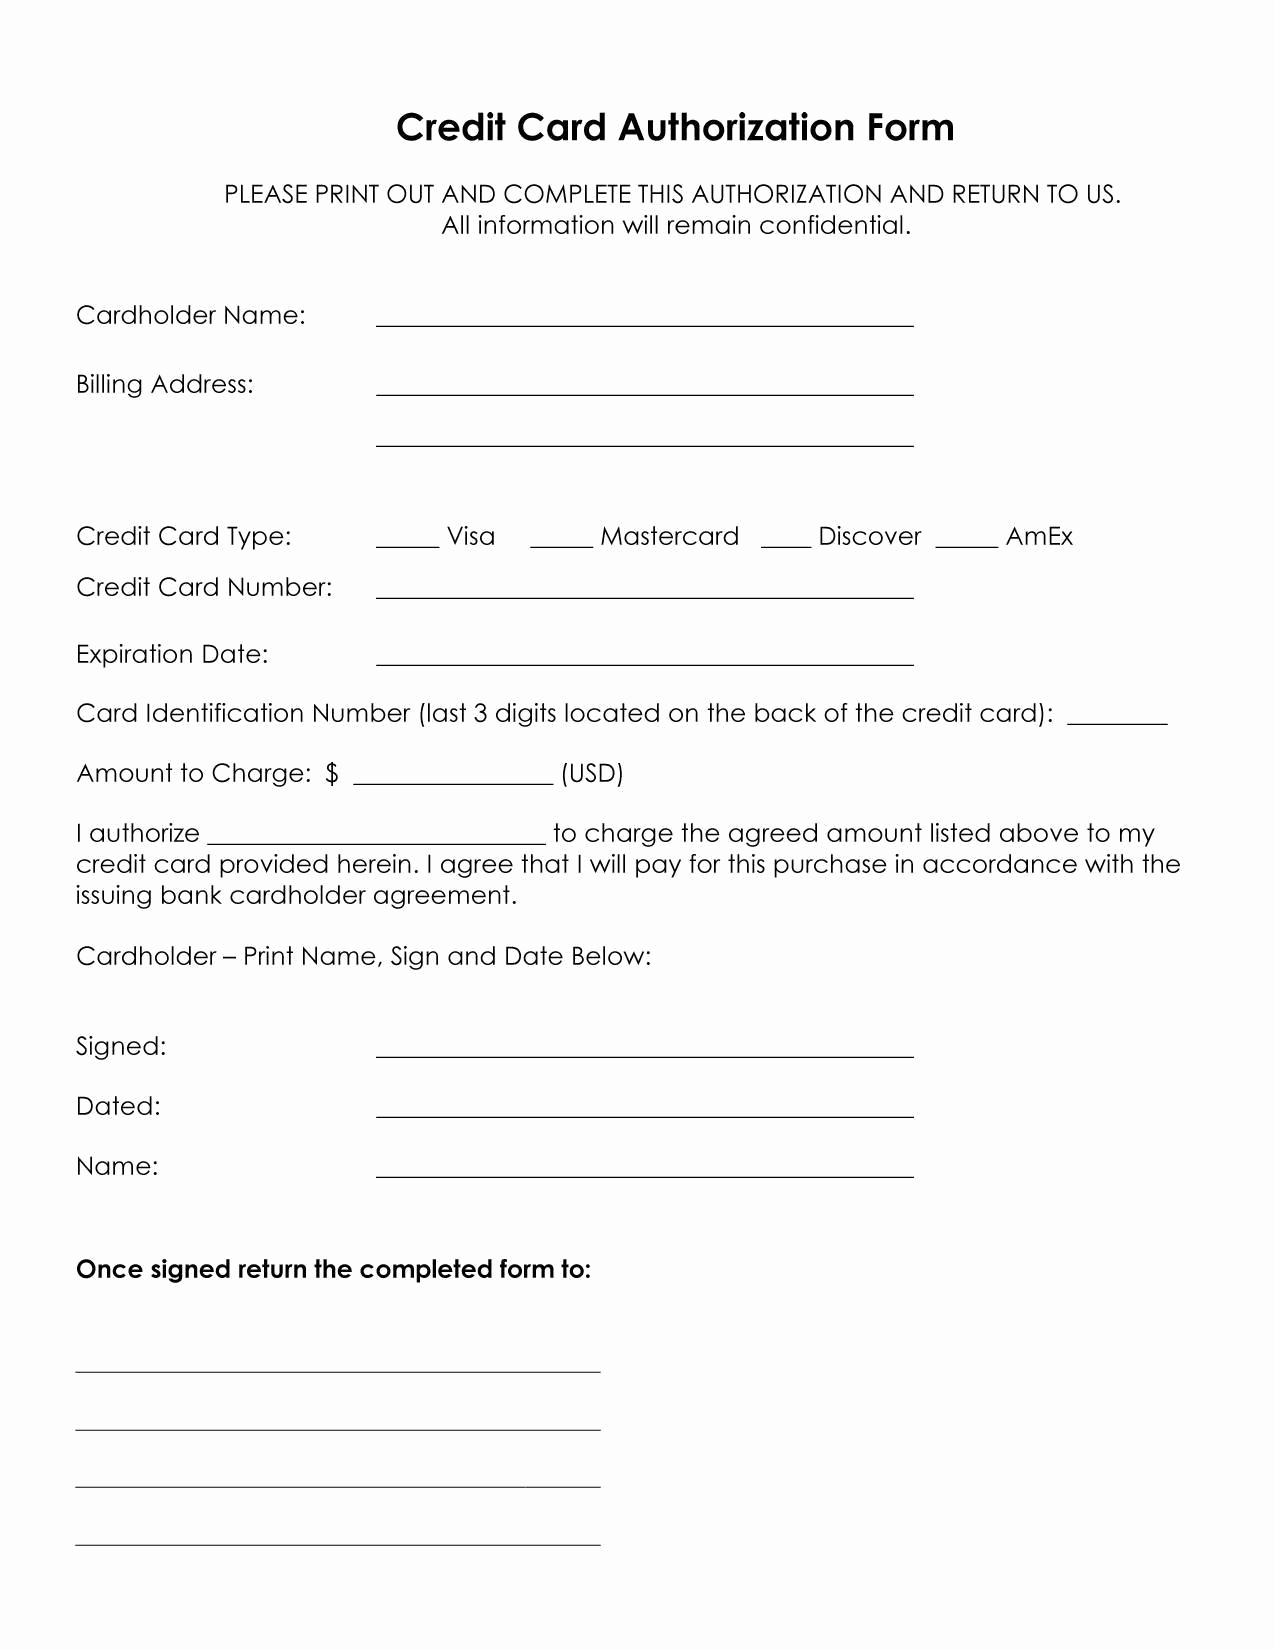 Credit Card form Template Fresh Authorization for Credit Card Use Free forms Download